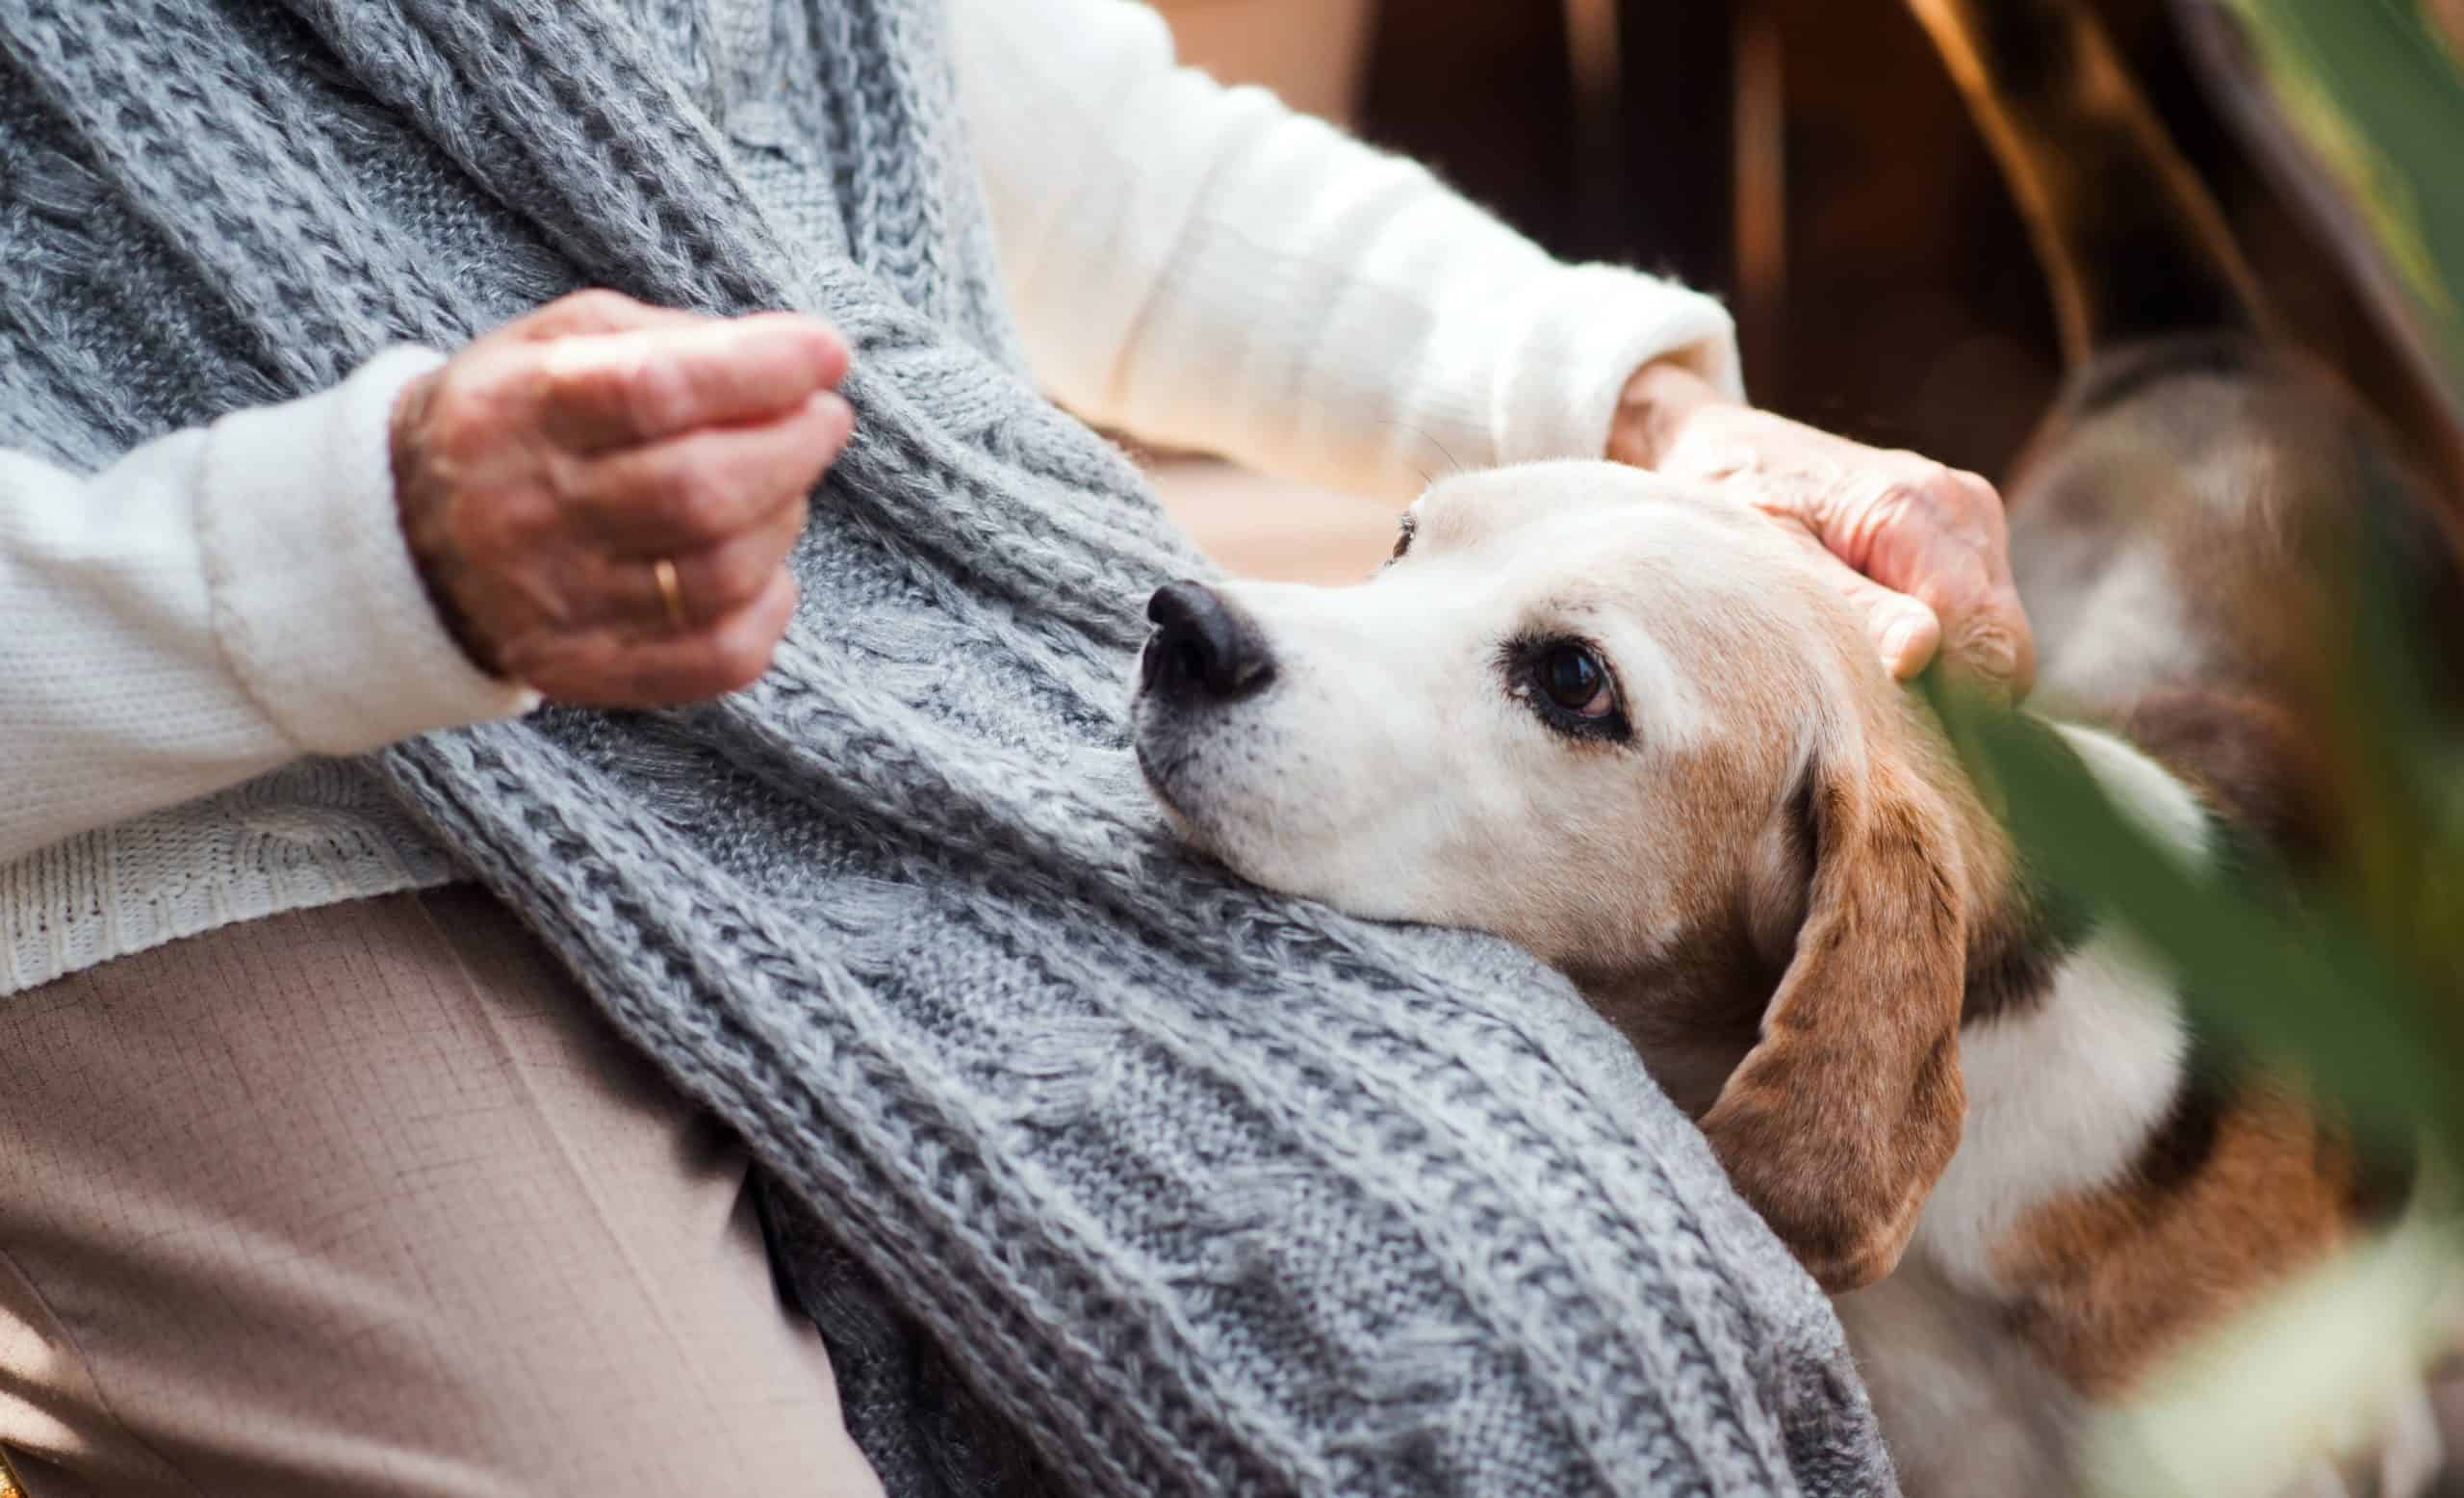 Woman comforts old beagle. If your pet is experiencing pain, you should do everything possible to relieve your dog's suffering.